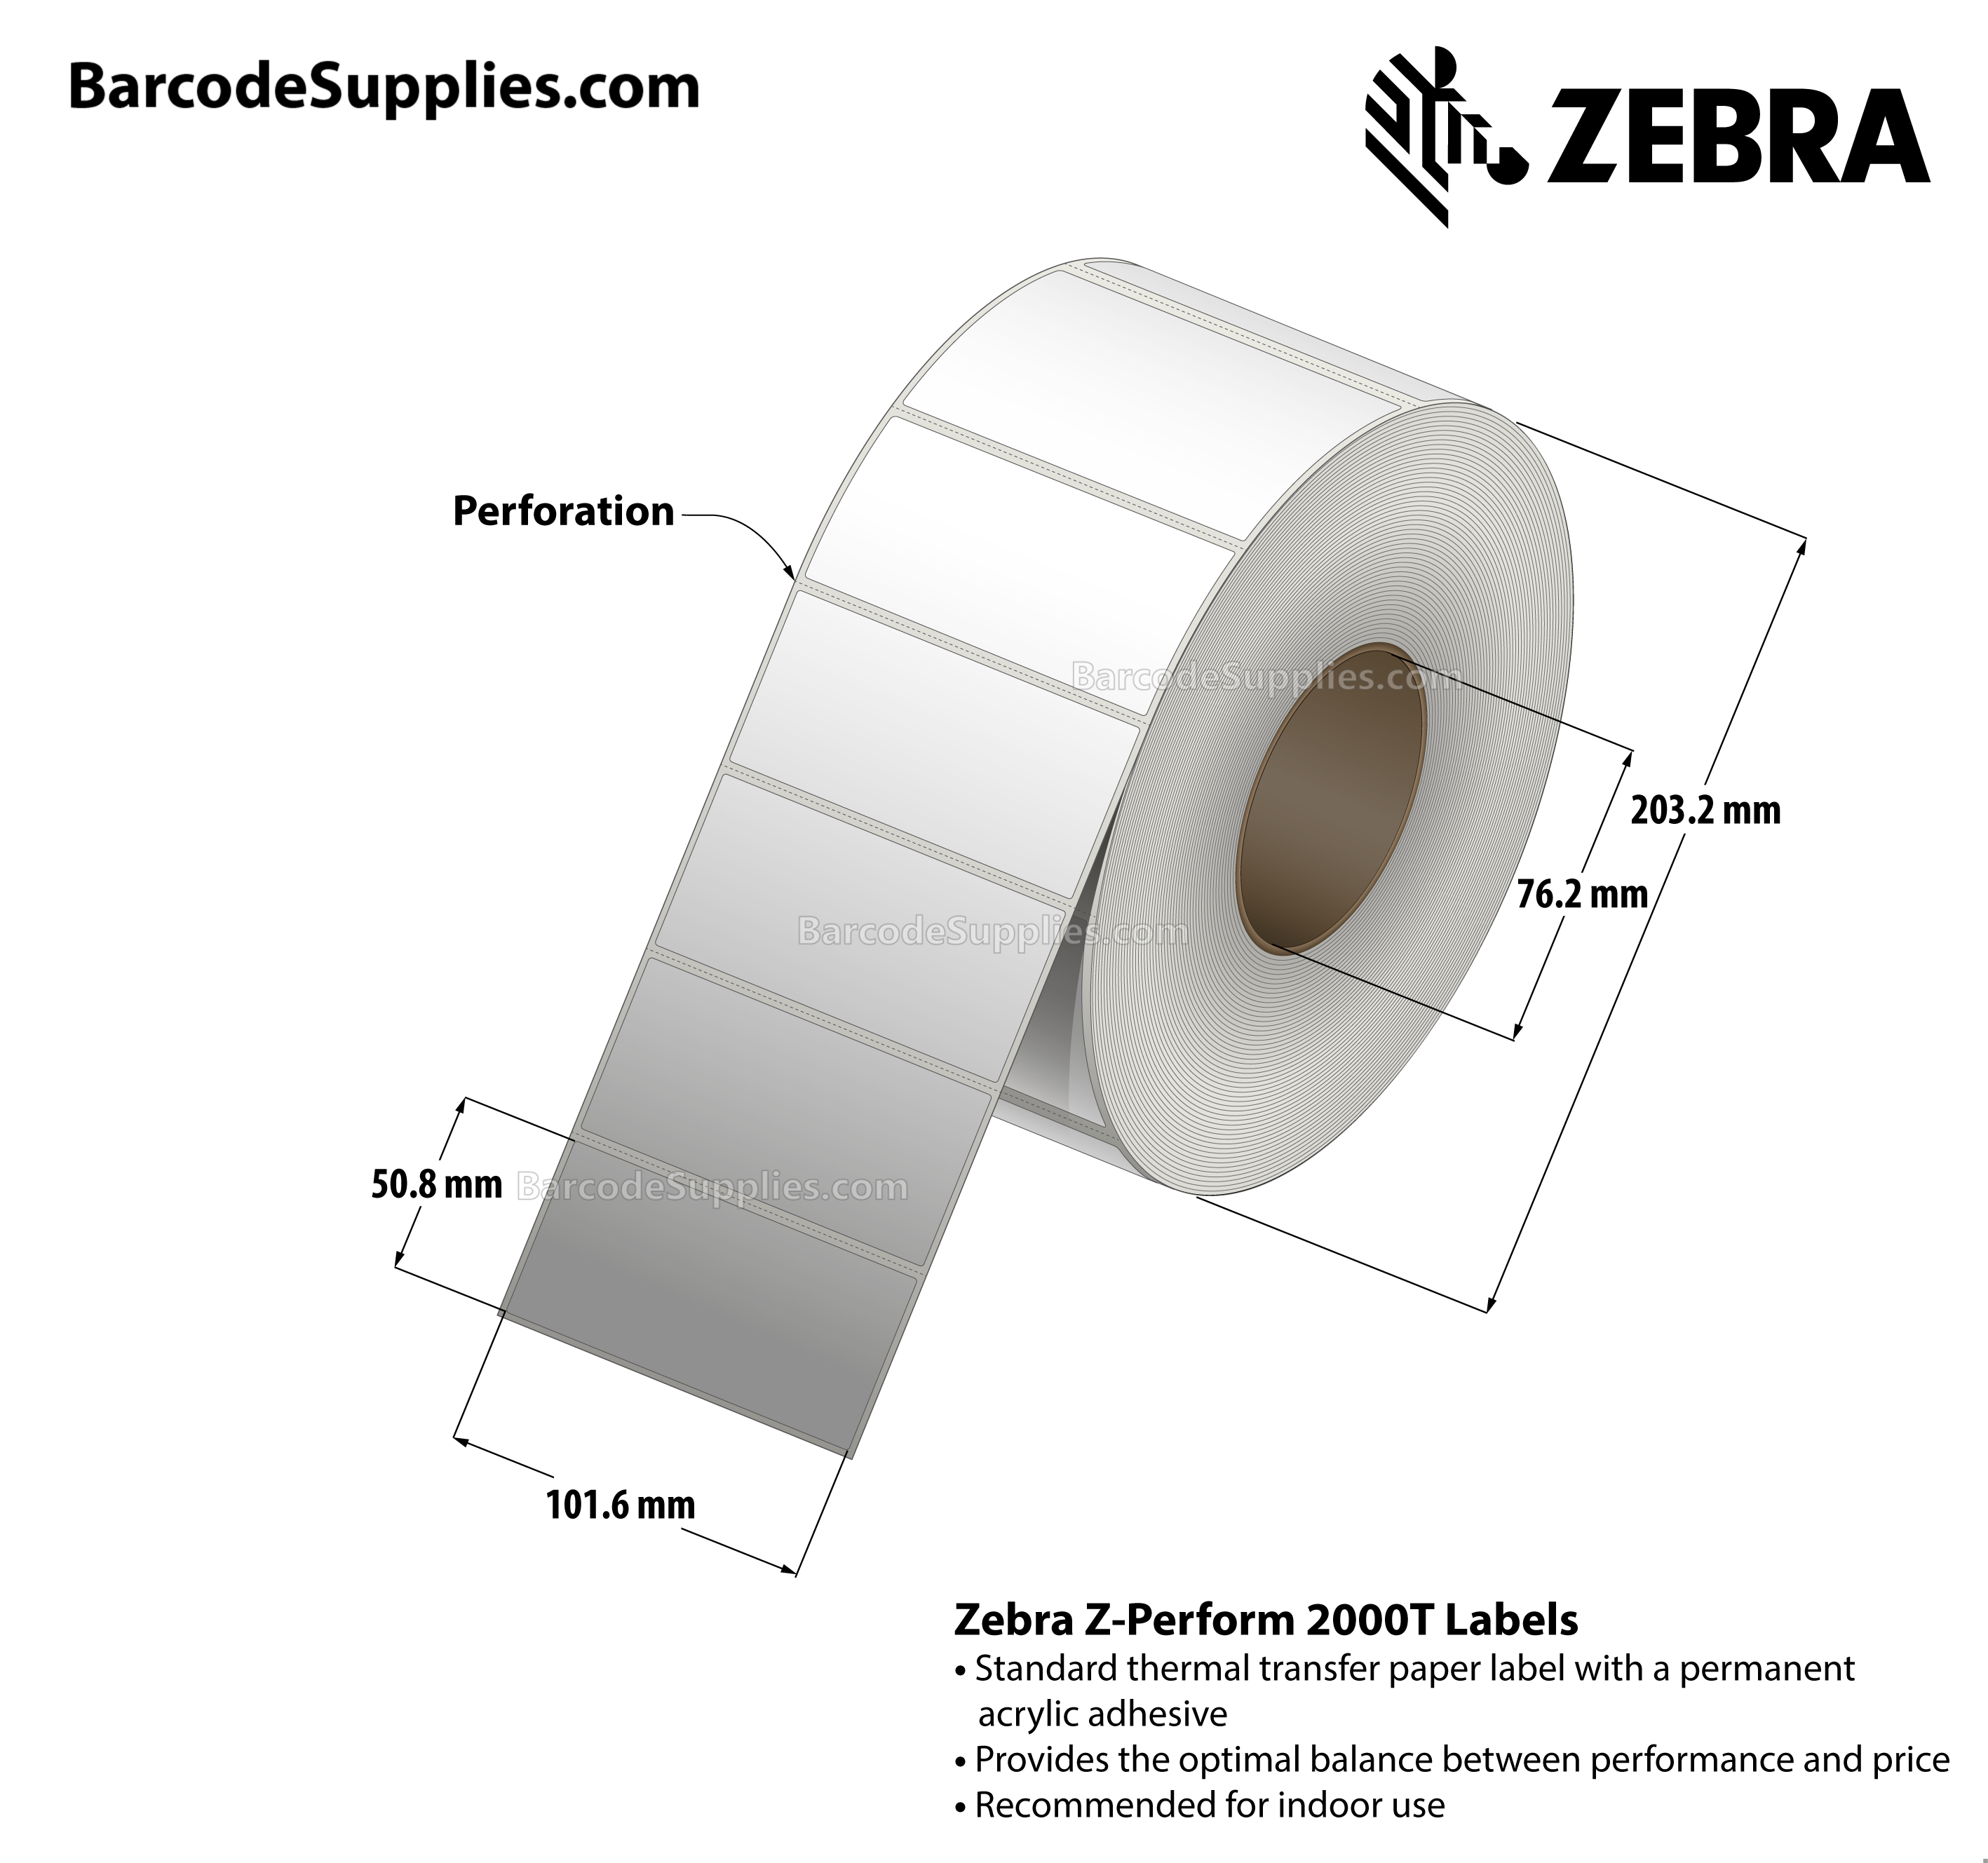 4 x 2 Thermal Transfer White Z-Perform 2000T Labels With Permanent Adhesive - Perforated - 2750 Labels Per Roll - Carton Of 4 Rolls - 11000 Labels Total - MPN: 10000285